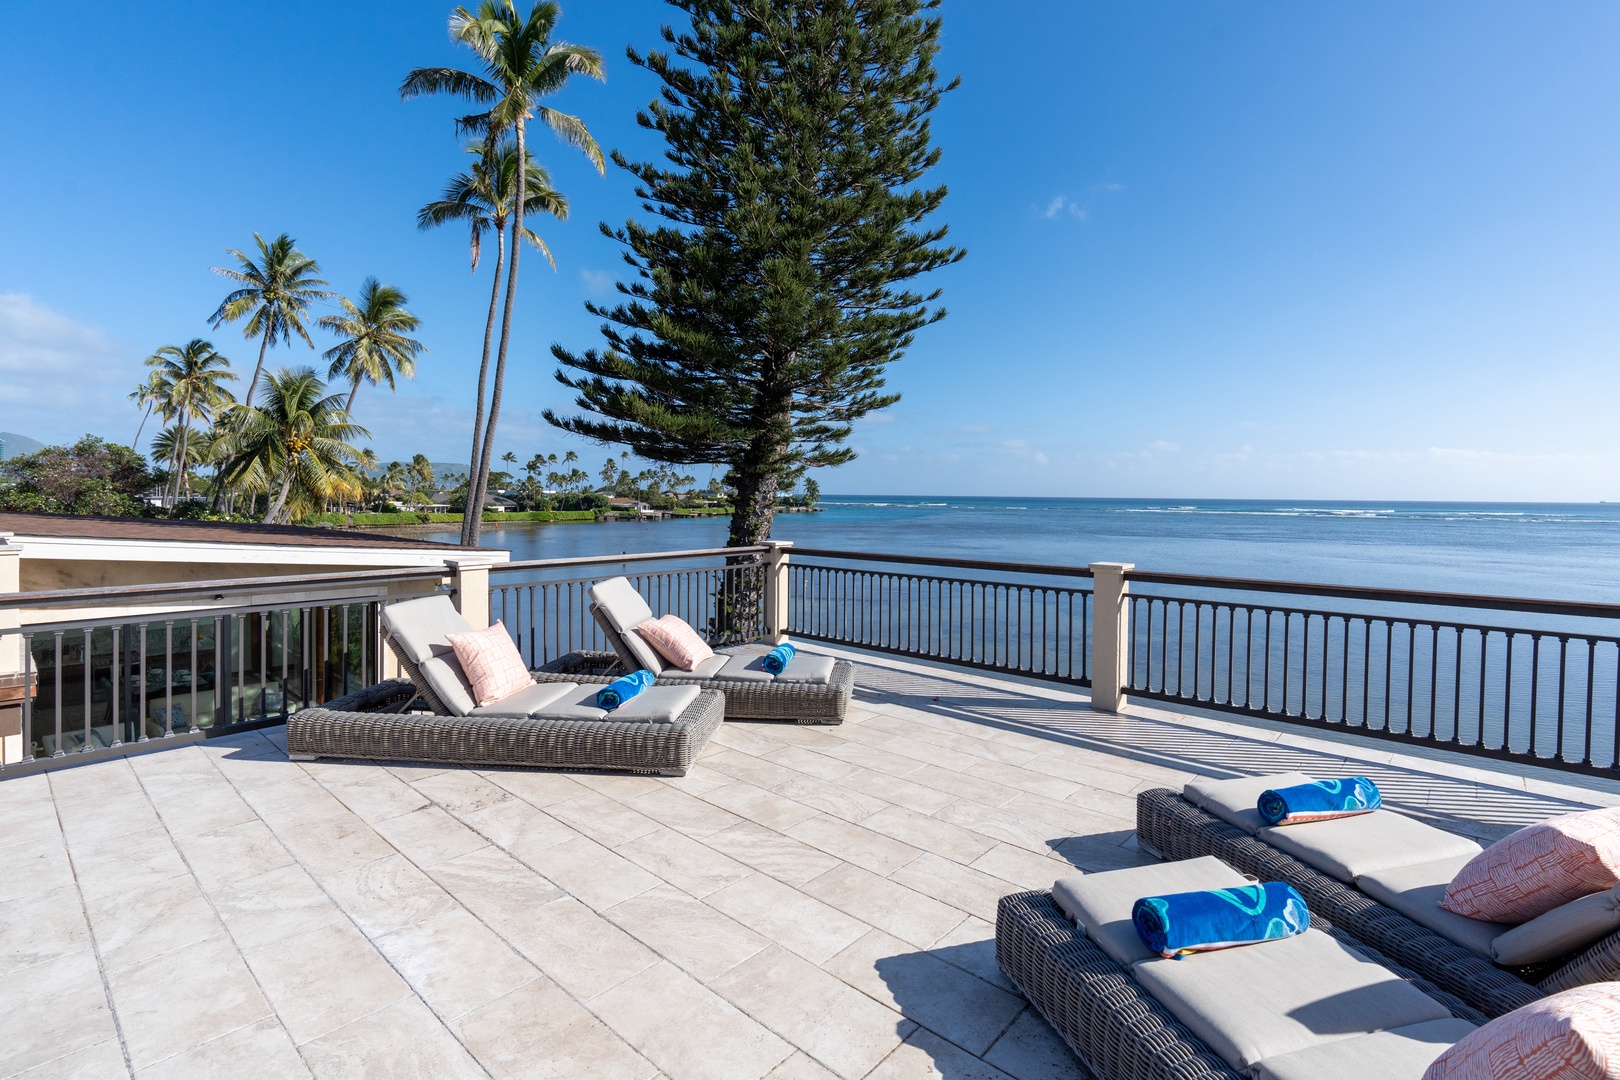 Honolulu Vacation Rentals, Wailupe Seaside - Your rooftop deck provides a cool breeze, amazing views and the perfect relaxation.